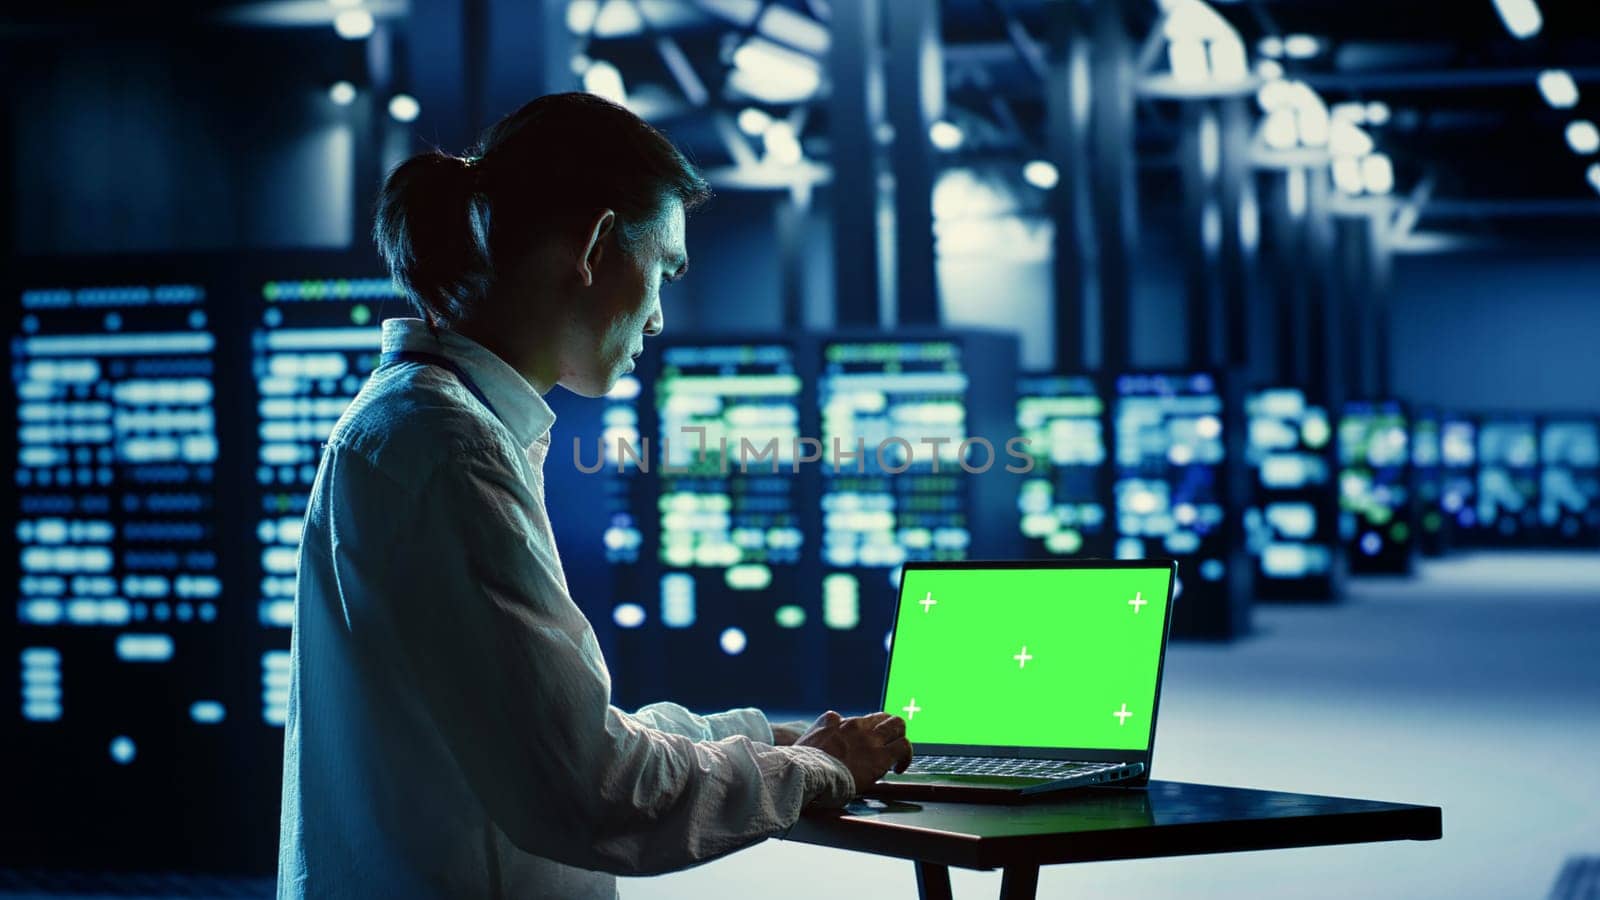 IT consultant running code on chroma key laptop, troubleshooting data center equipment. Cloud computing business executive using green screen device to examine servers and networking systems